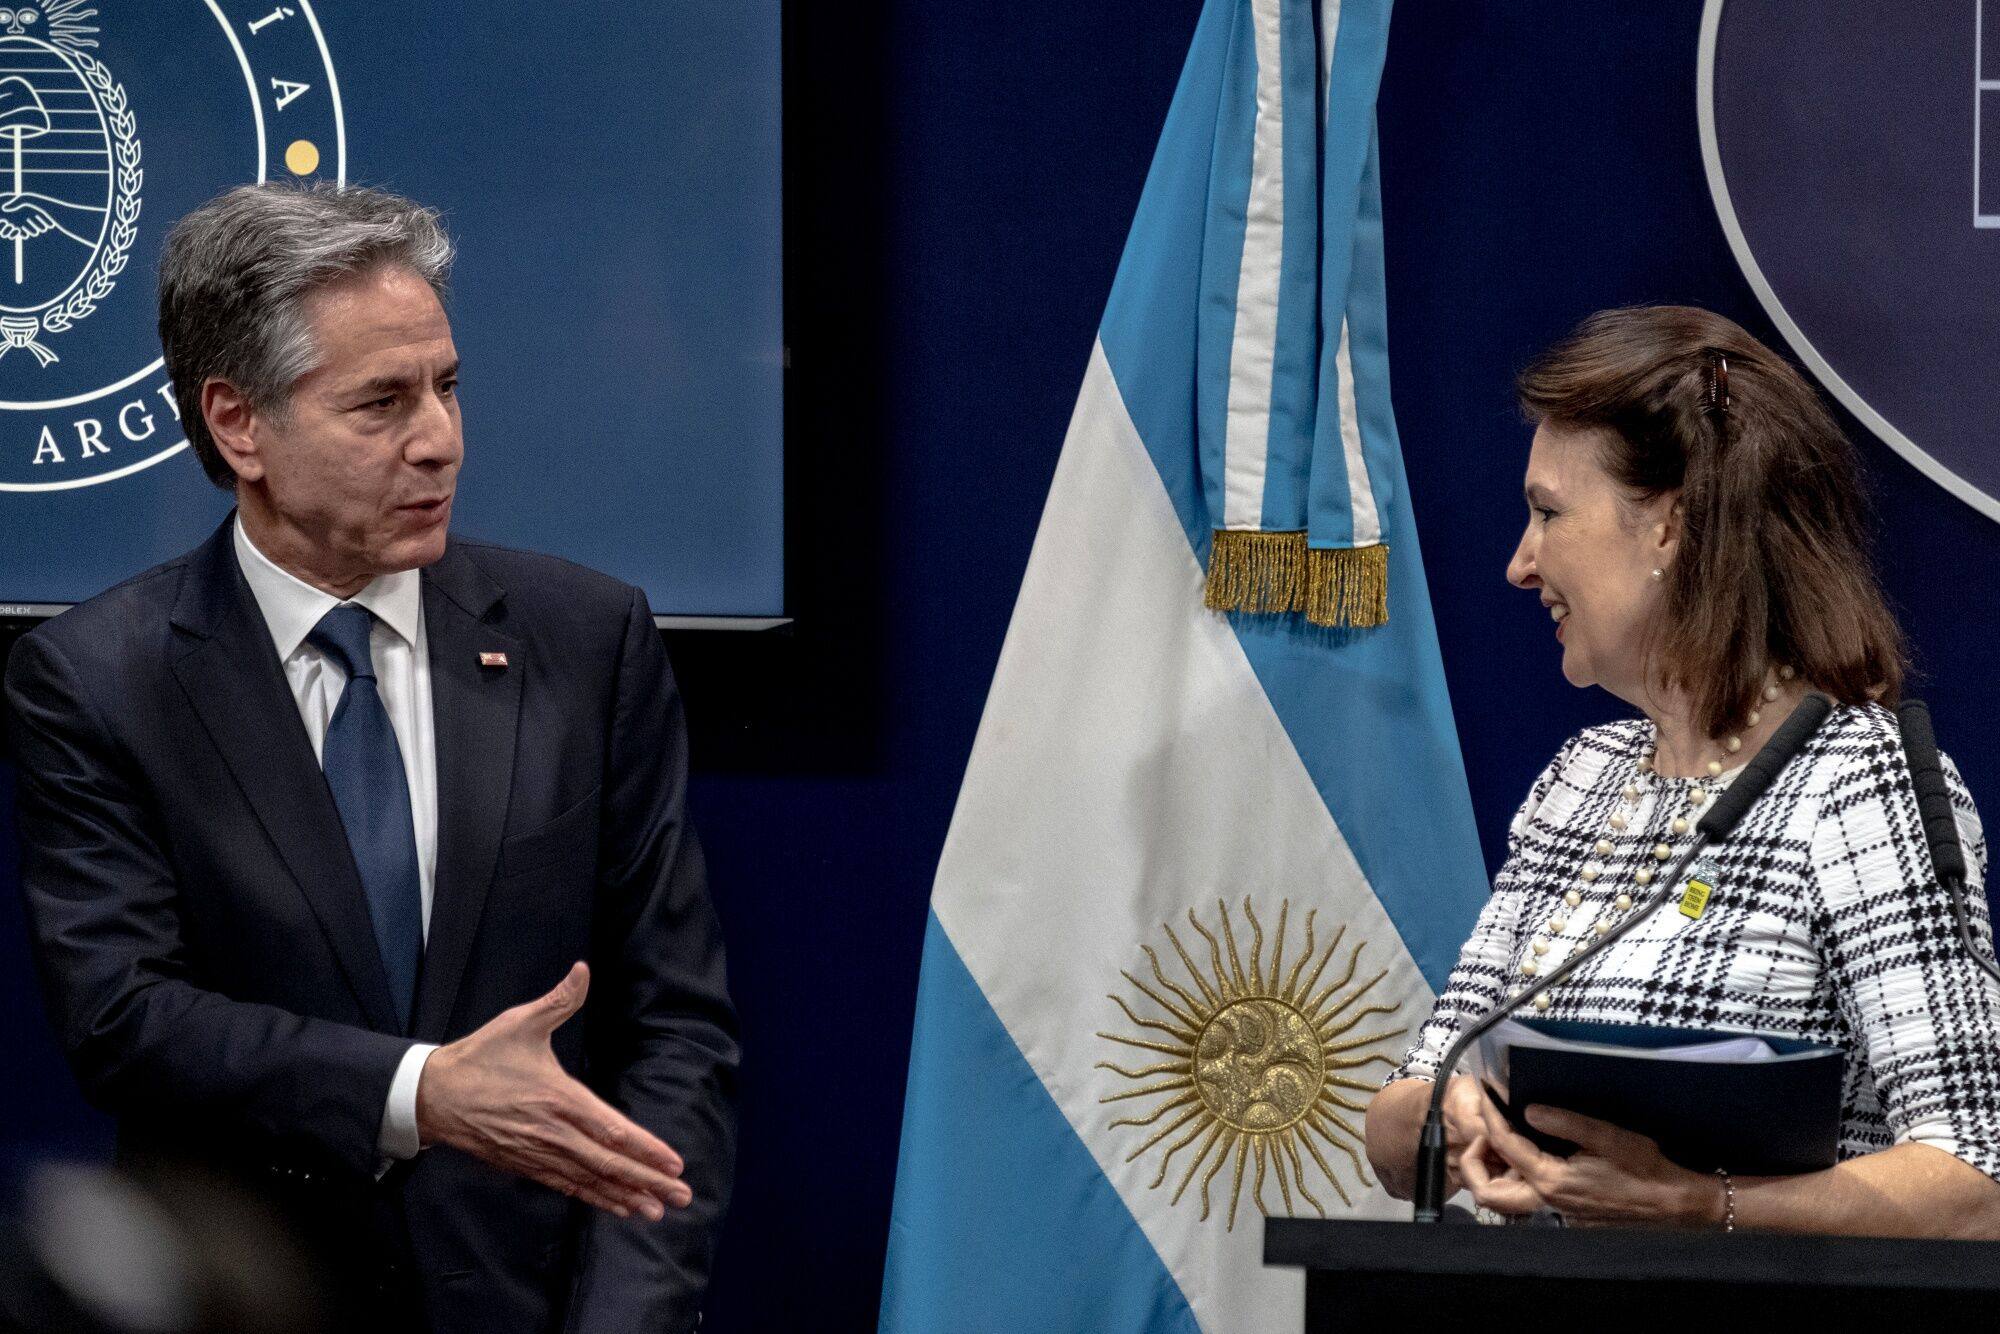 US Secretary of State Antony Blinken (left) and Argentine Foreign Minister Diana Mondino presiding at a press conference in Buenos Aires on Friday. Photo: Bloomberg